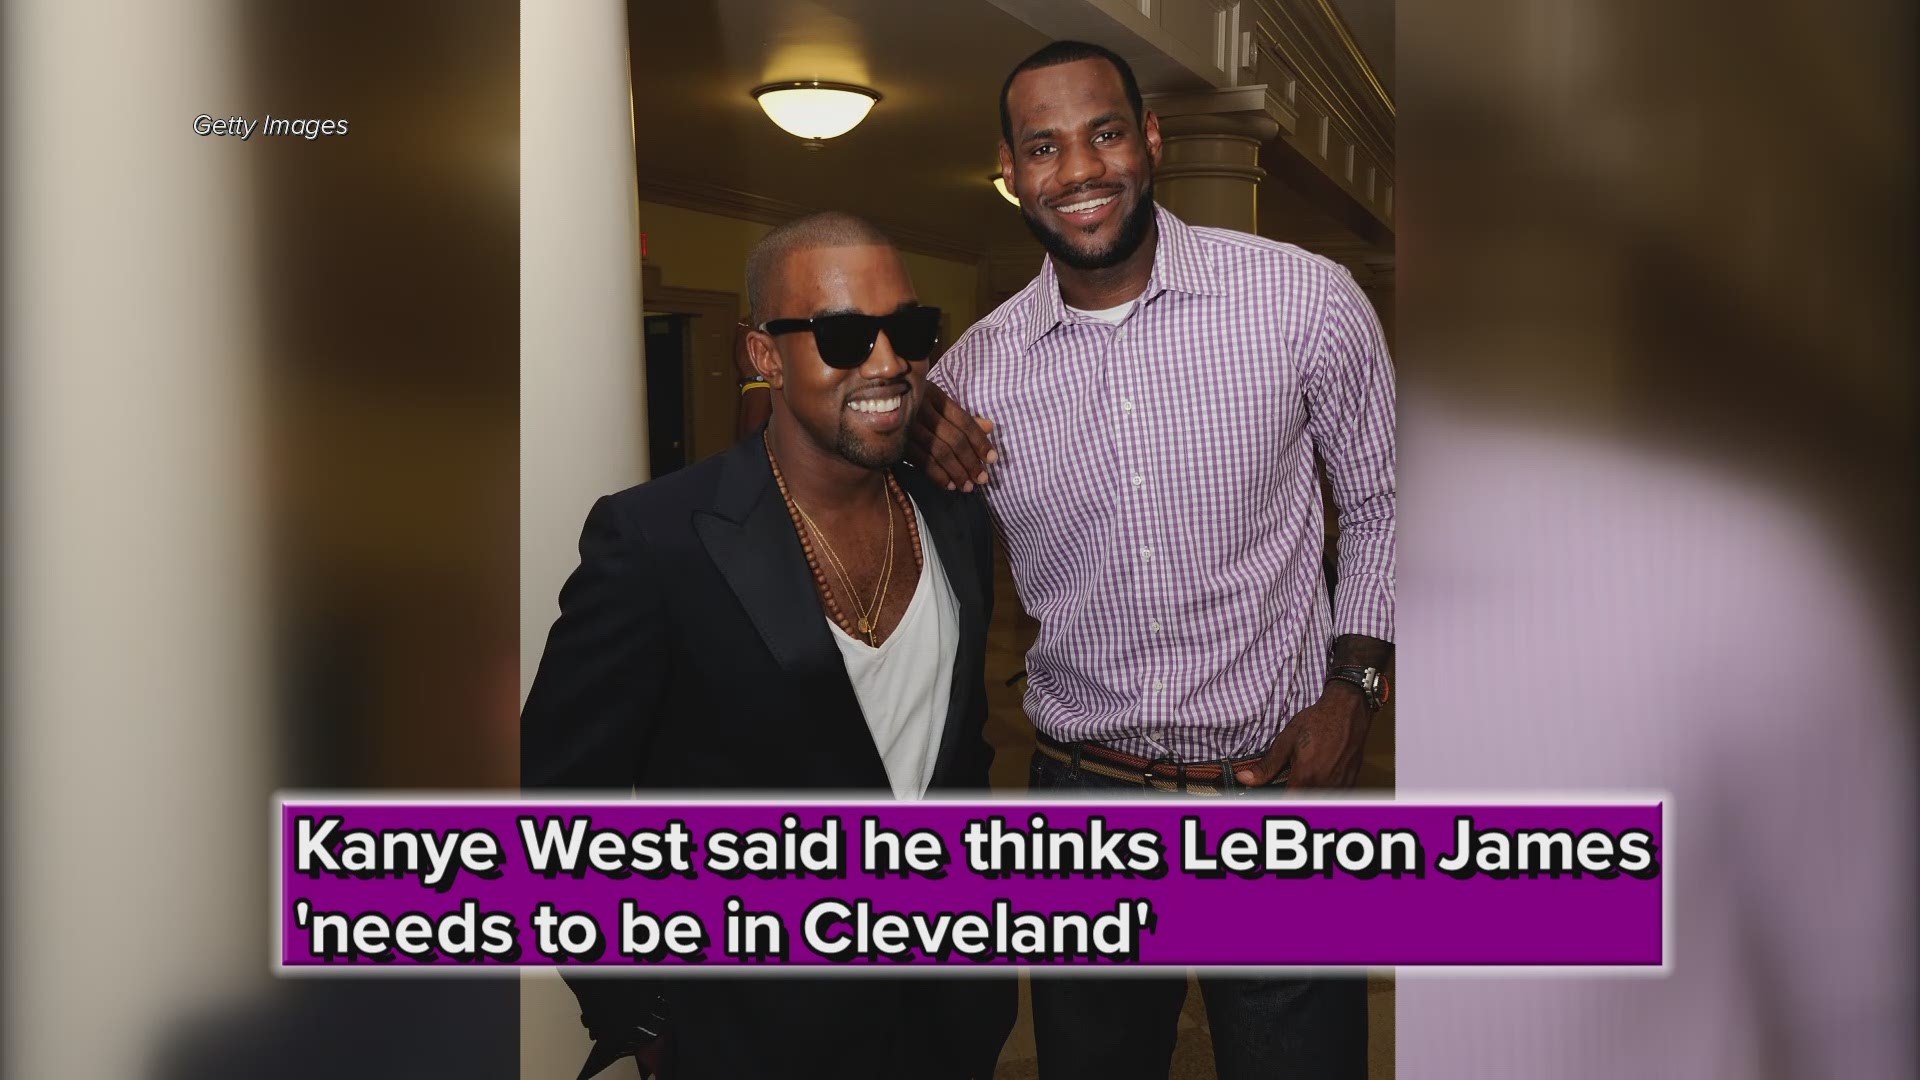 Kanye West: LeBron James 'needs to be in Cleveland'